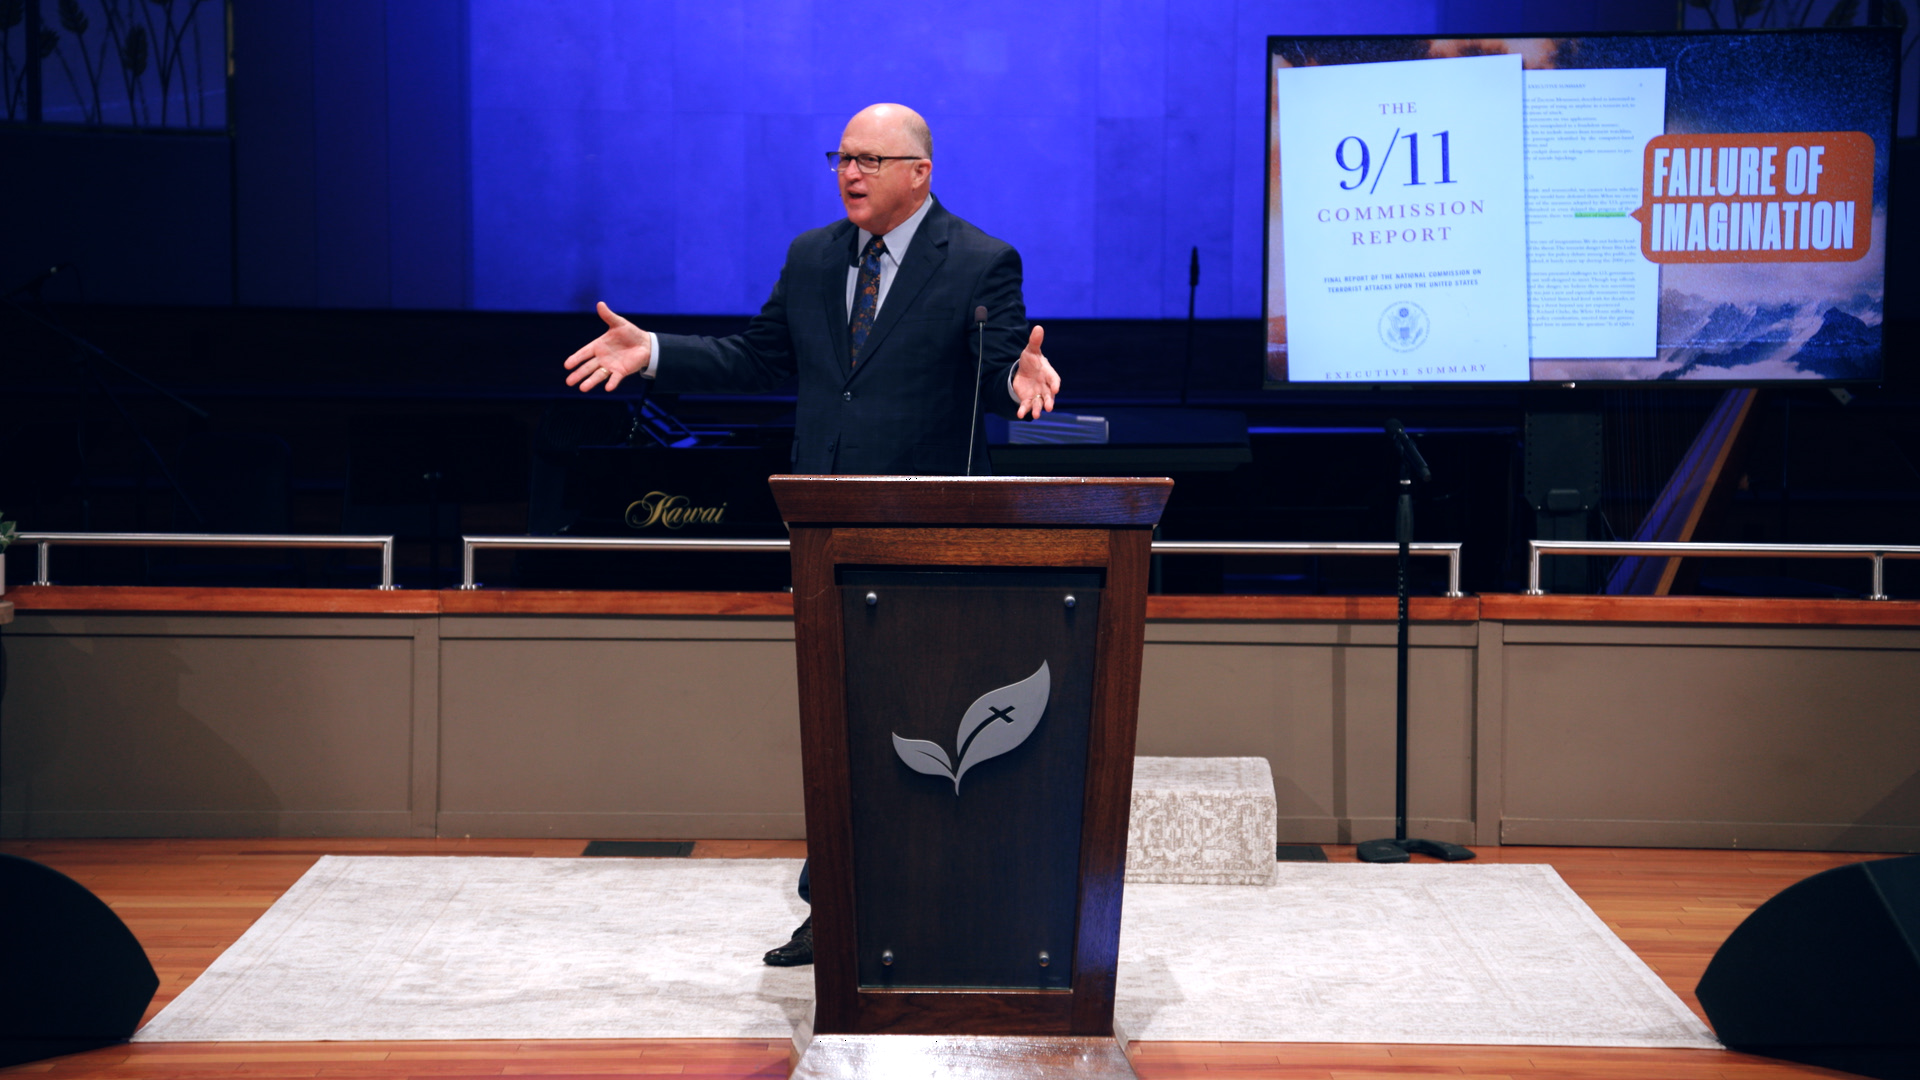 Pastor Paul Chappell: Courageous In Battle